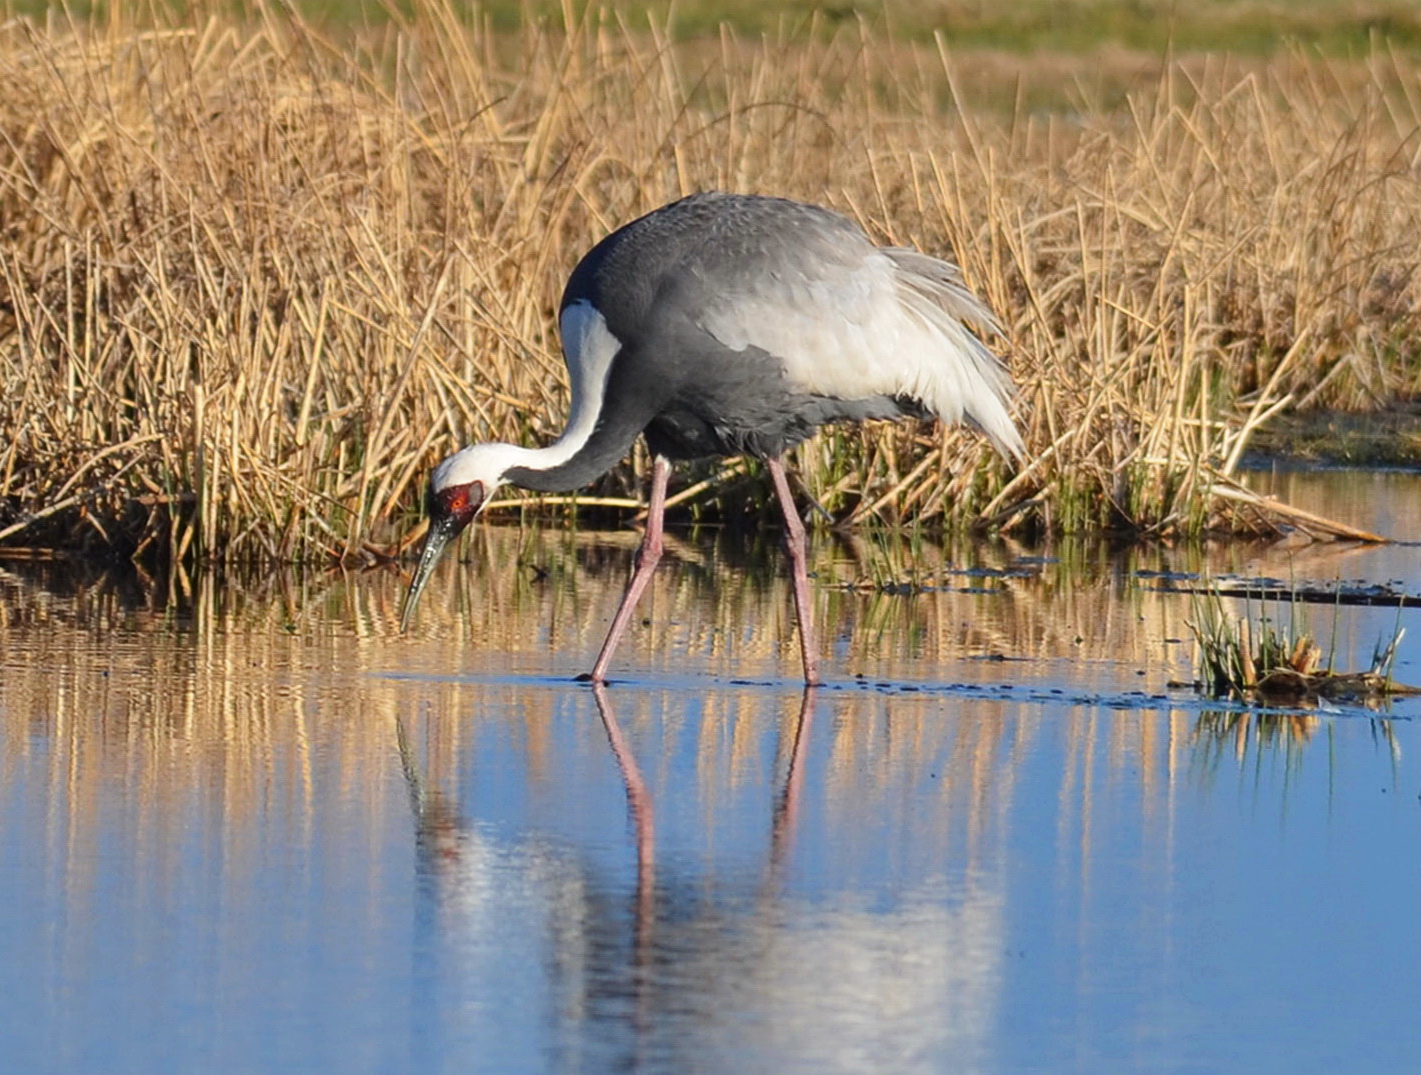 A male White-naped Crane feeds near its nest at Lake Lebedinoe, a small steppe body of water in the Torey Depression